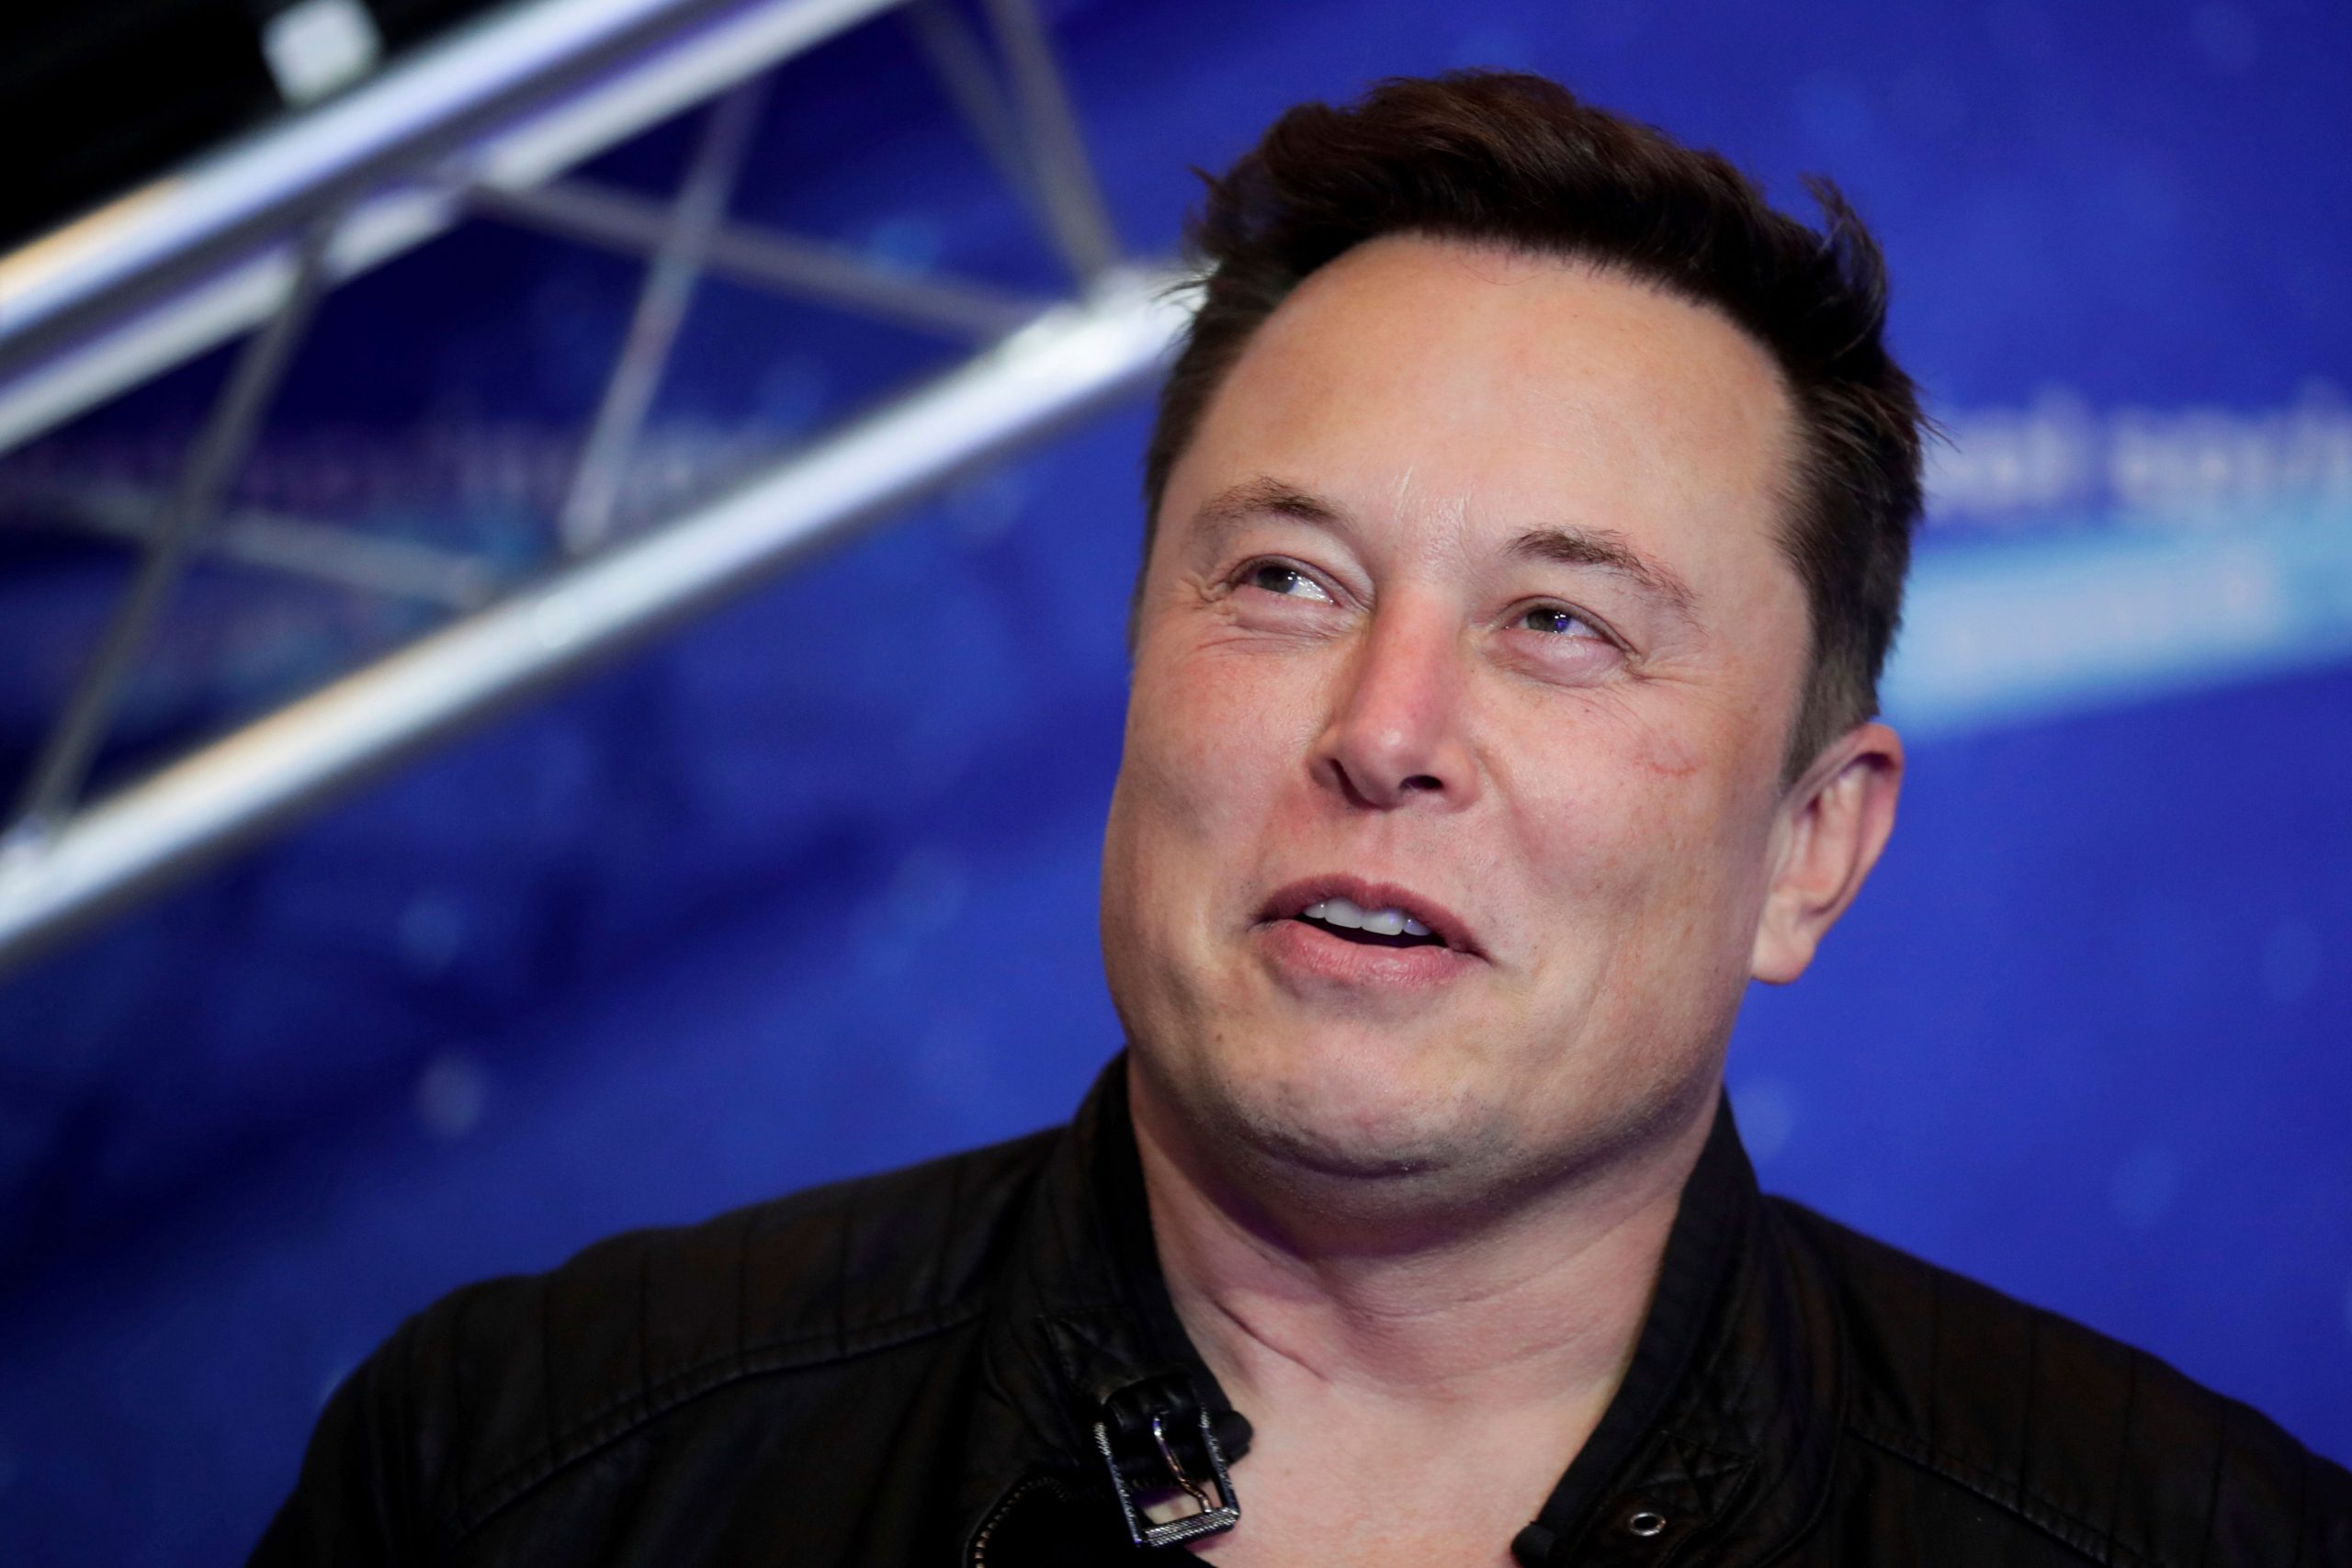 Can Twitter force Elon Musk to buy company?